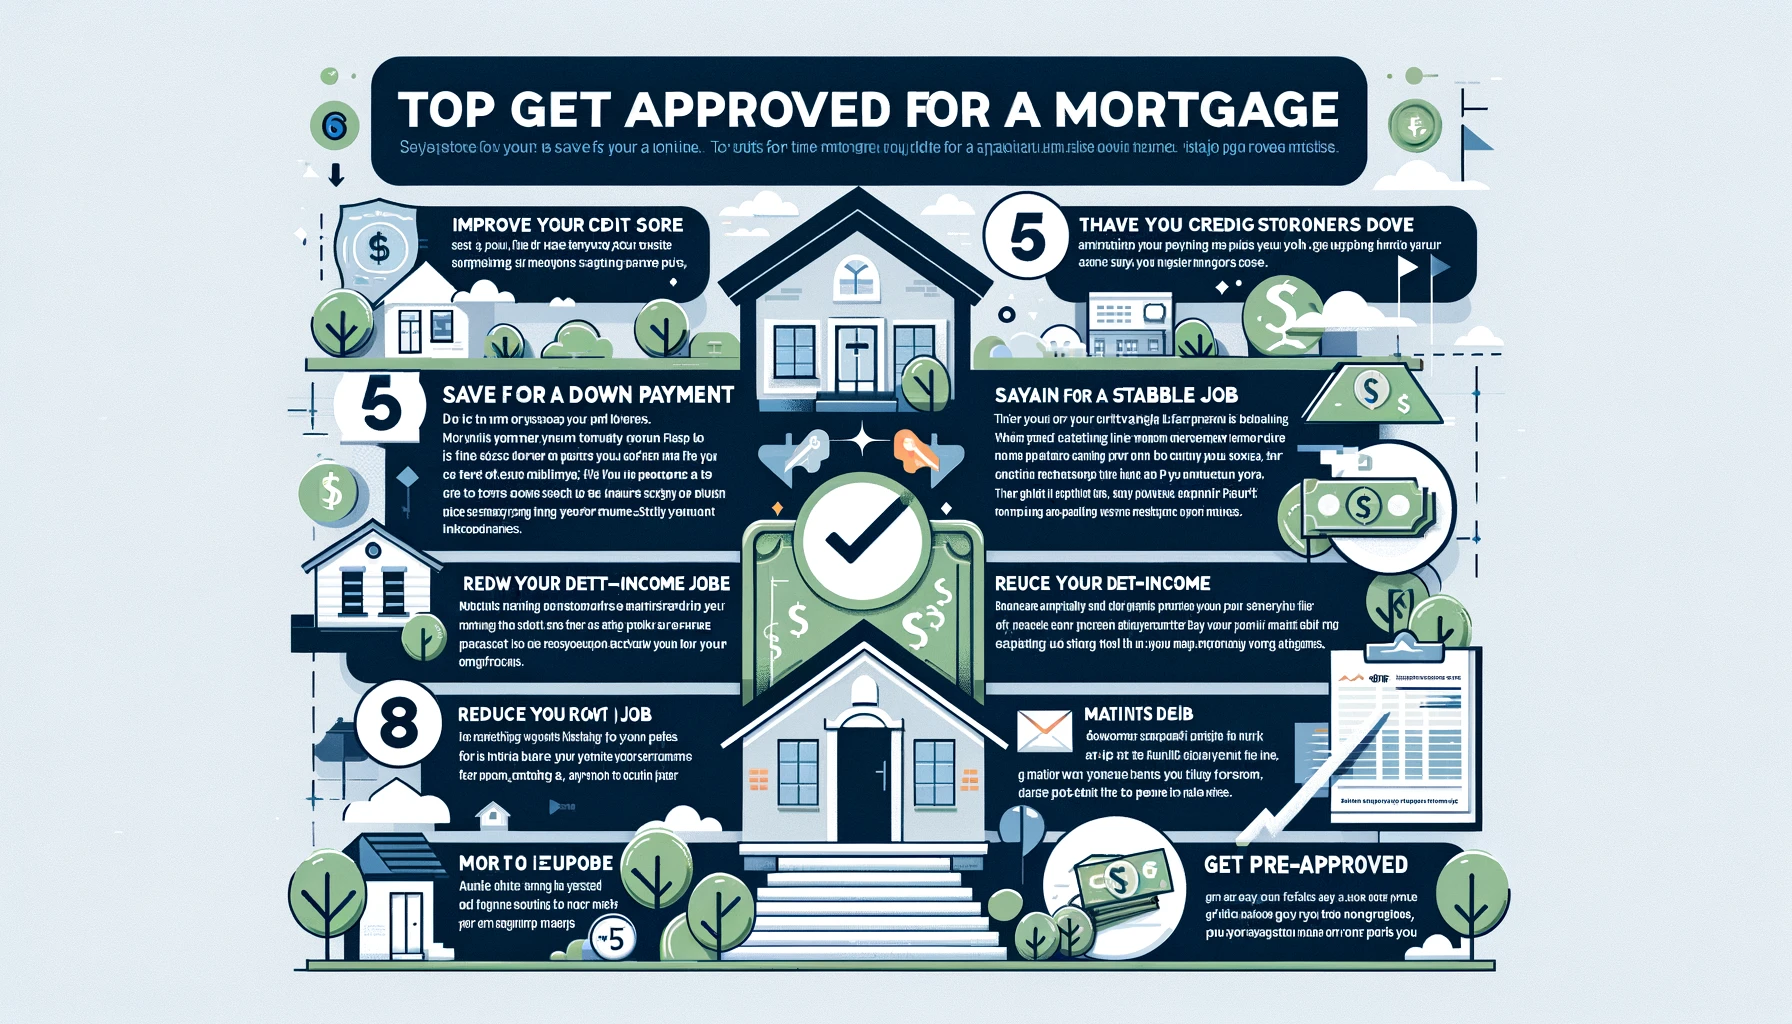 Top Tips for Getting Approved for a Mortgage